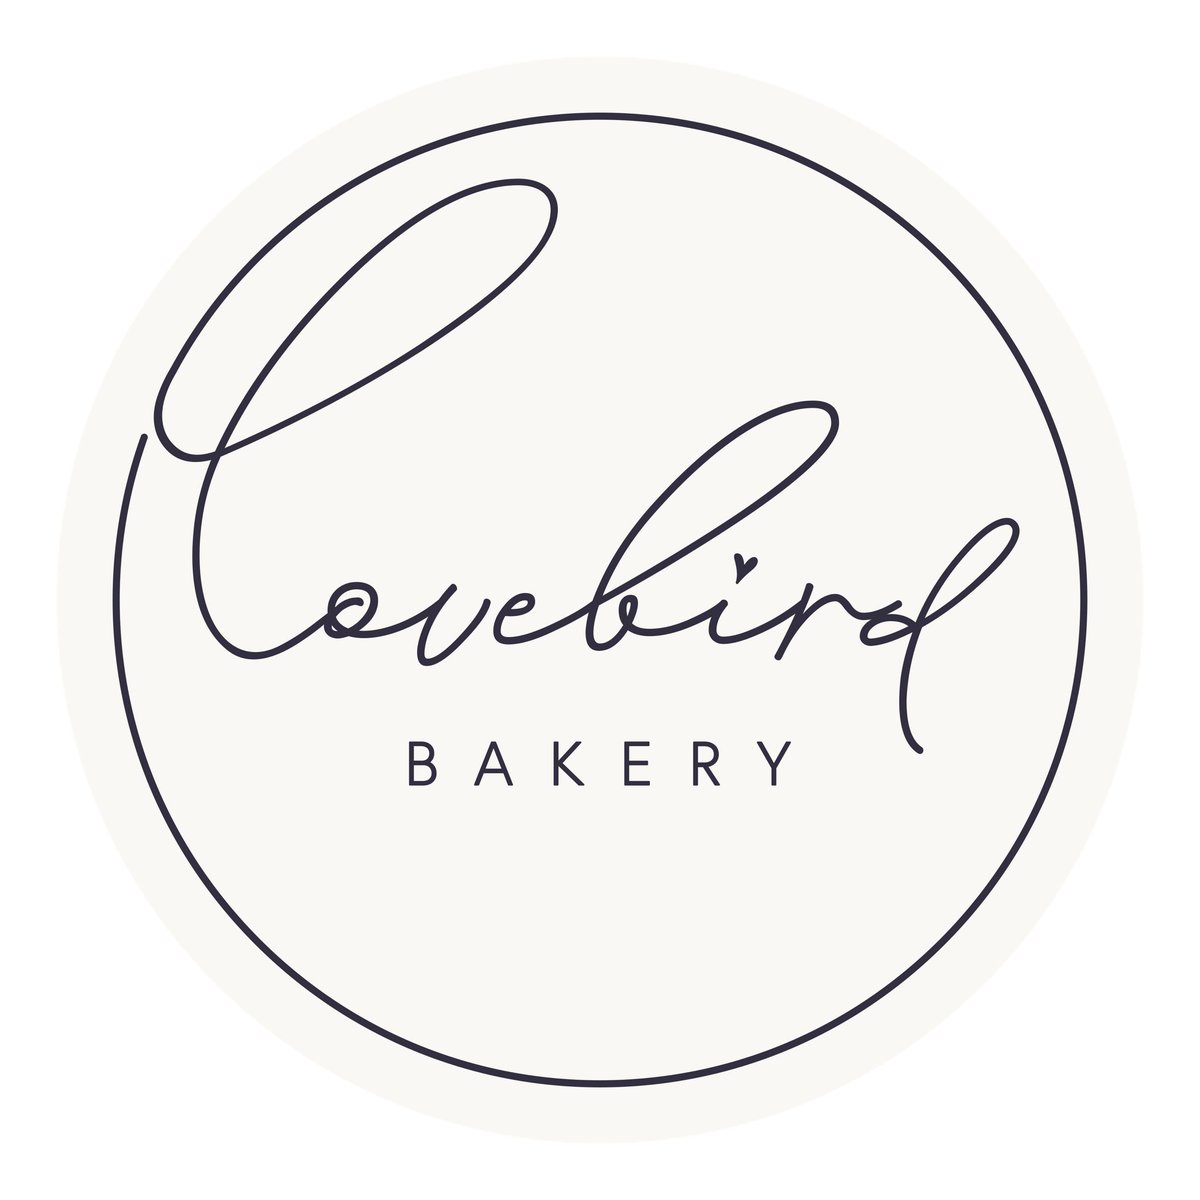 A new identity I’ve created for Lovebird Bakery, whose cakes are stunning and taste incredible! The logo is in an elegant, handwritten style font, contained within a circle, the colour palette is a premium navy and slight off white. #designandbranding #bakery #graphicdesign